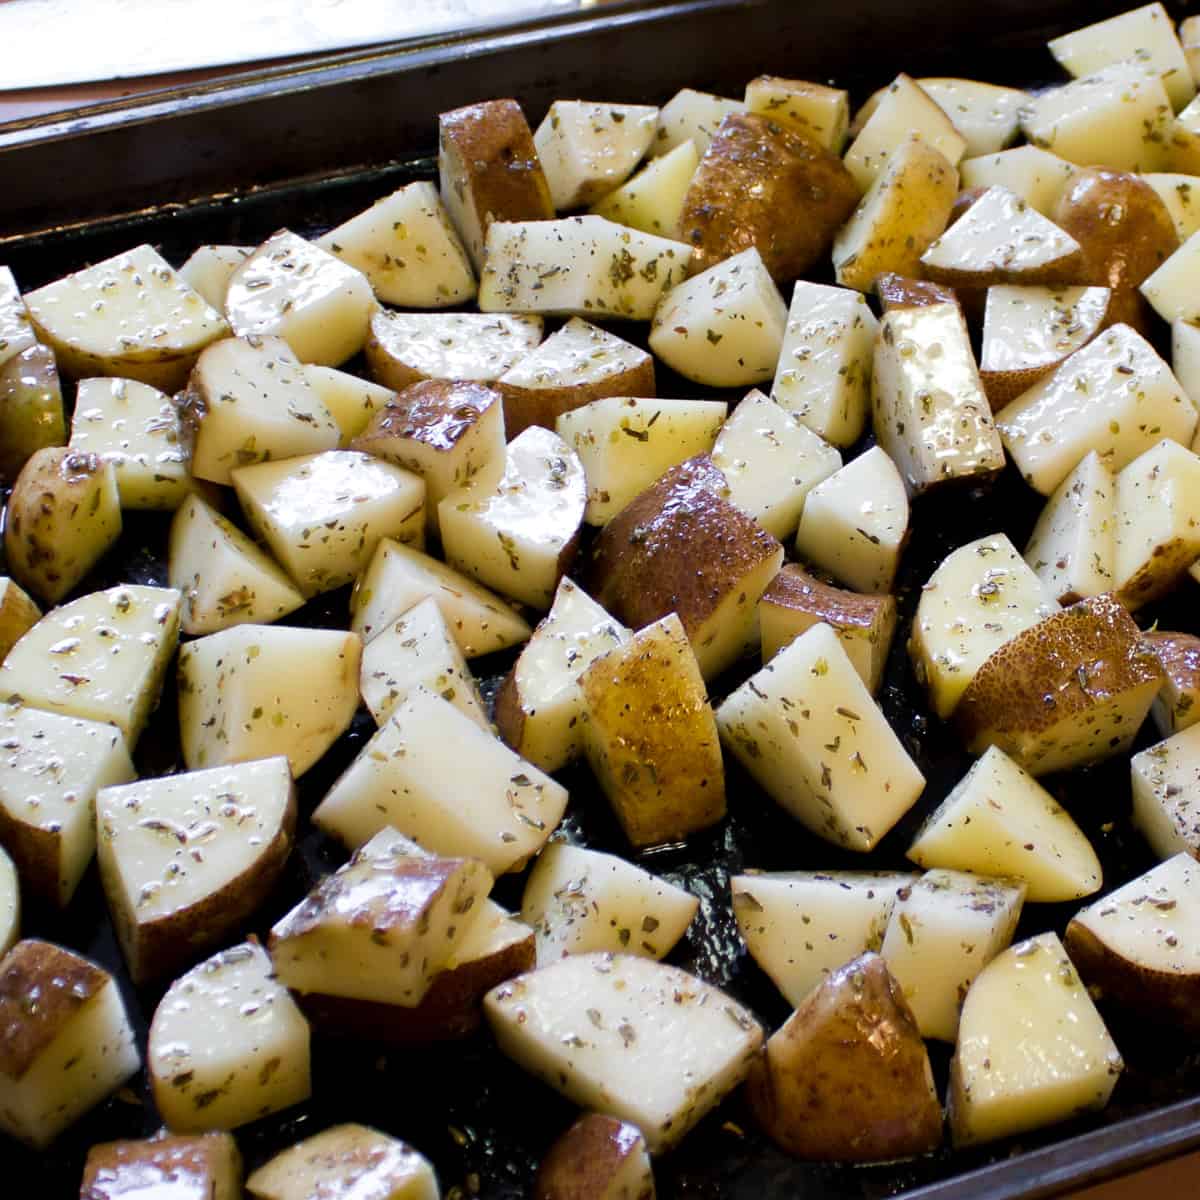 Diced raw potatoes tossed with seasoning and on a baking sheet ready to go in the oven.